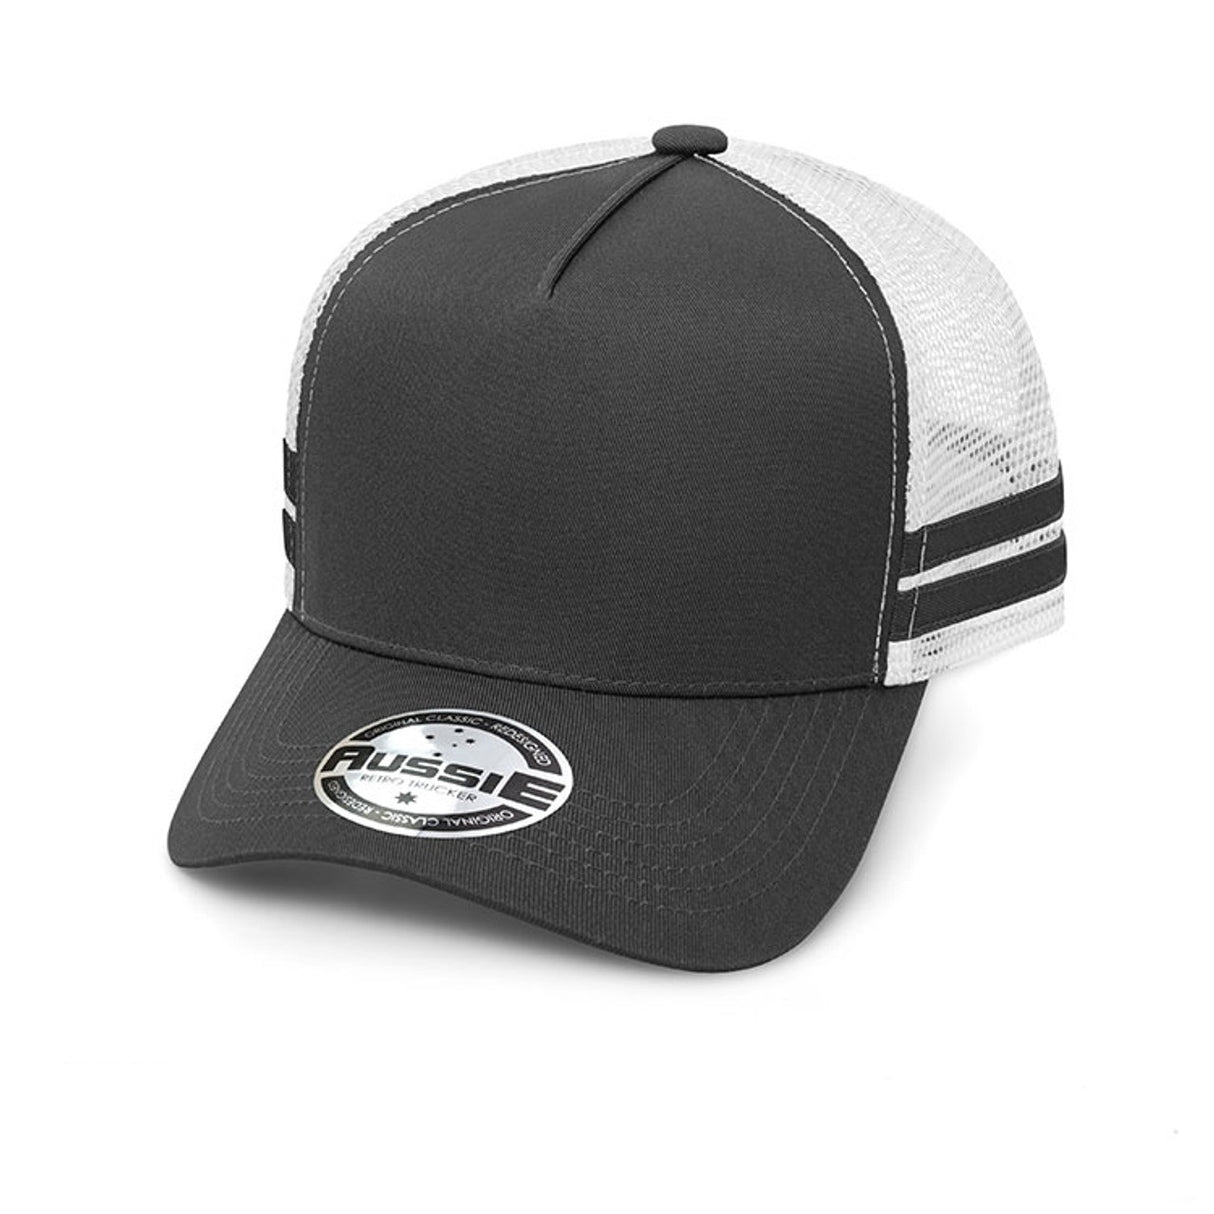 Striped Trucker Cap - Embroidered